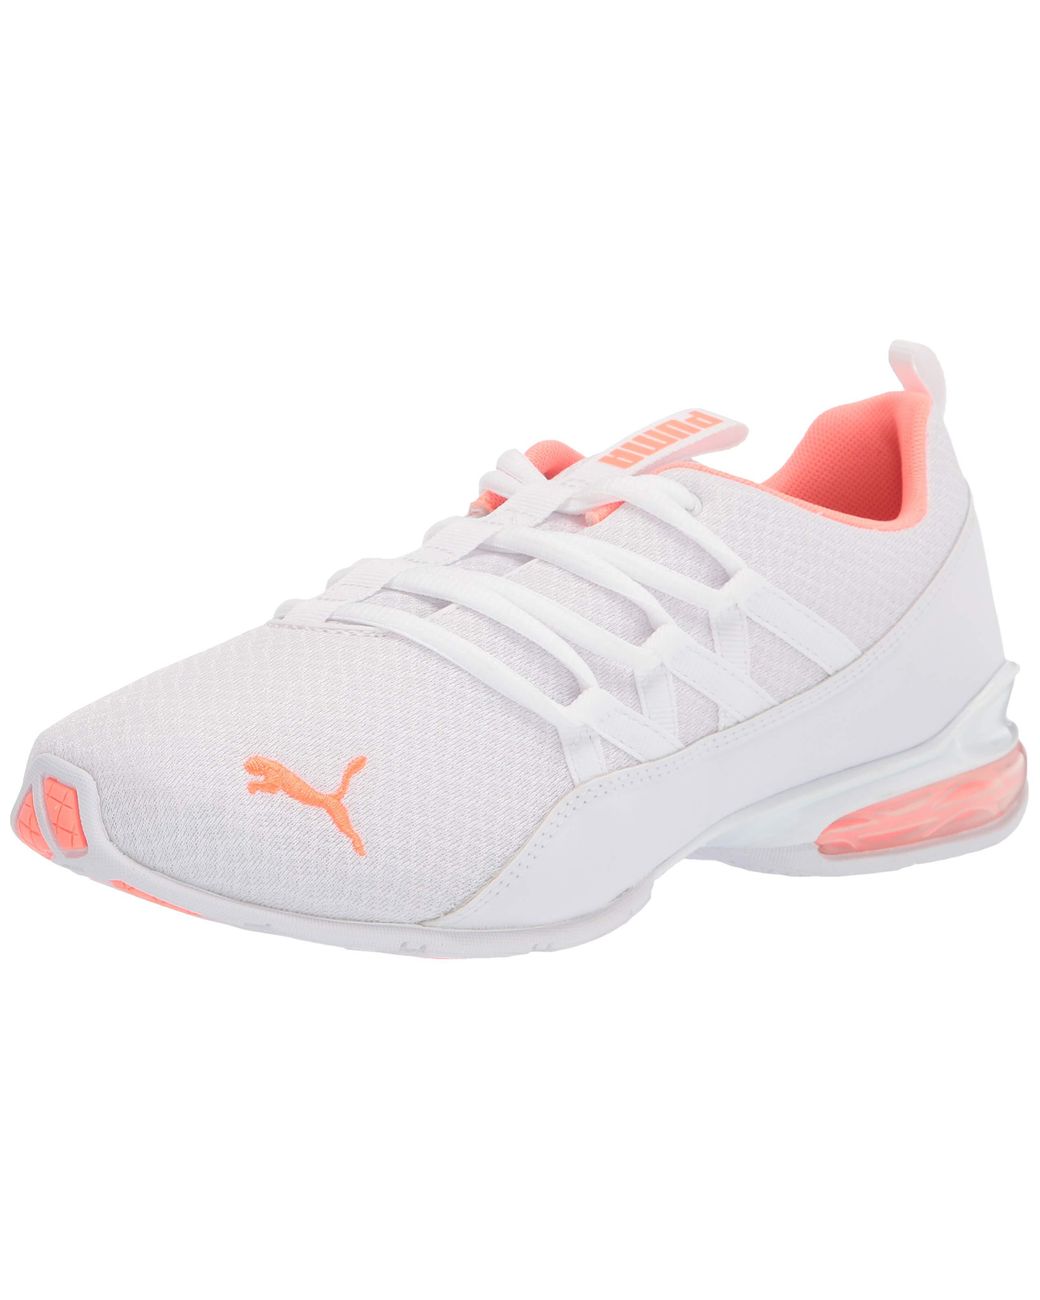 PUMA Riaze Prowl Cross Trainer in White - Save 8% - Lyst